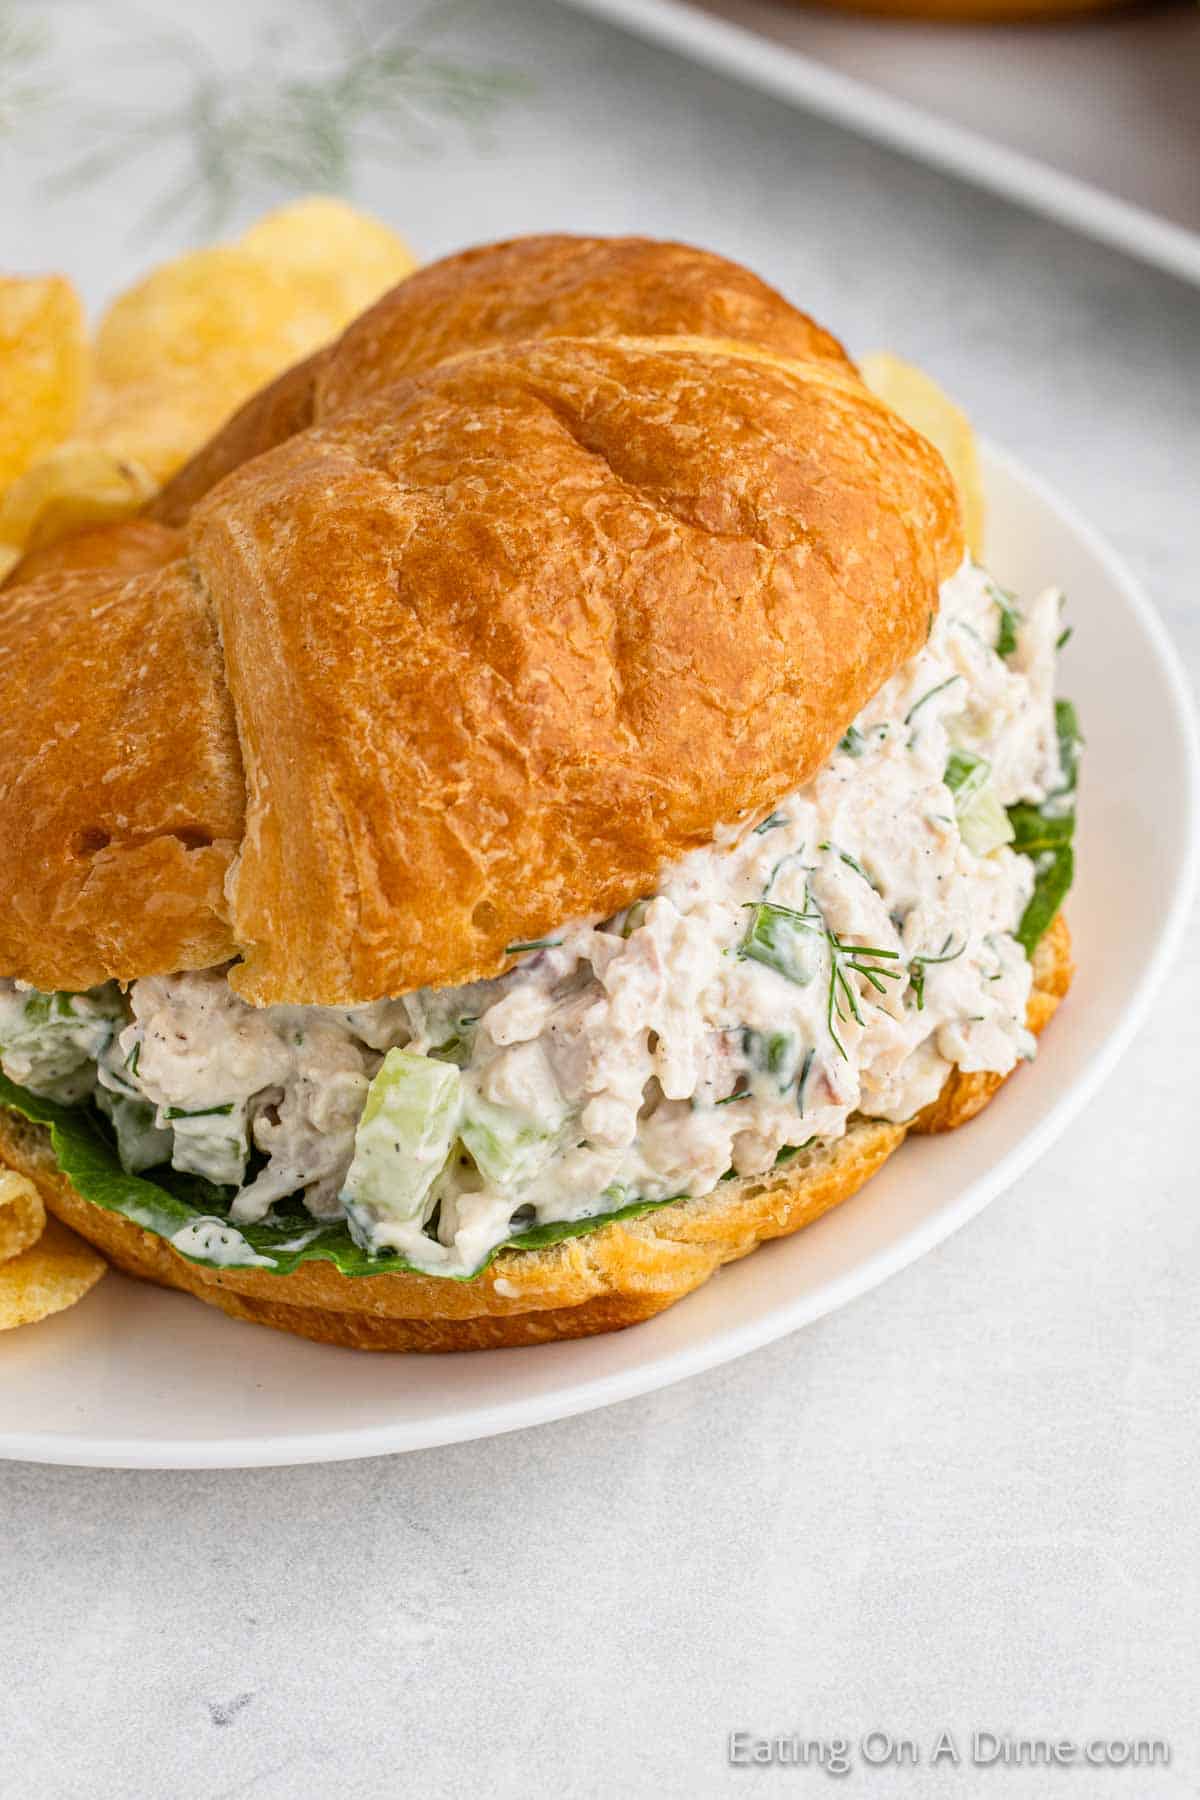 A croissant filled with the best chicken salad recipe, featuring creamy chicken, celery, and fresh herbs, placed on a white plate next to a handful of potato chips. The sandwich and chips are presented on a light gray surface.